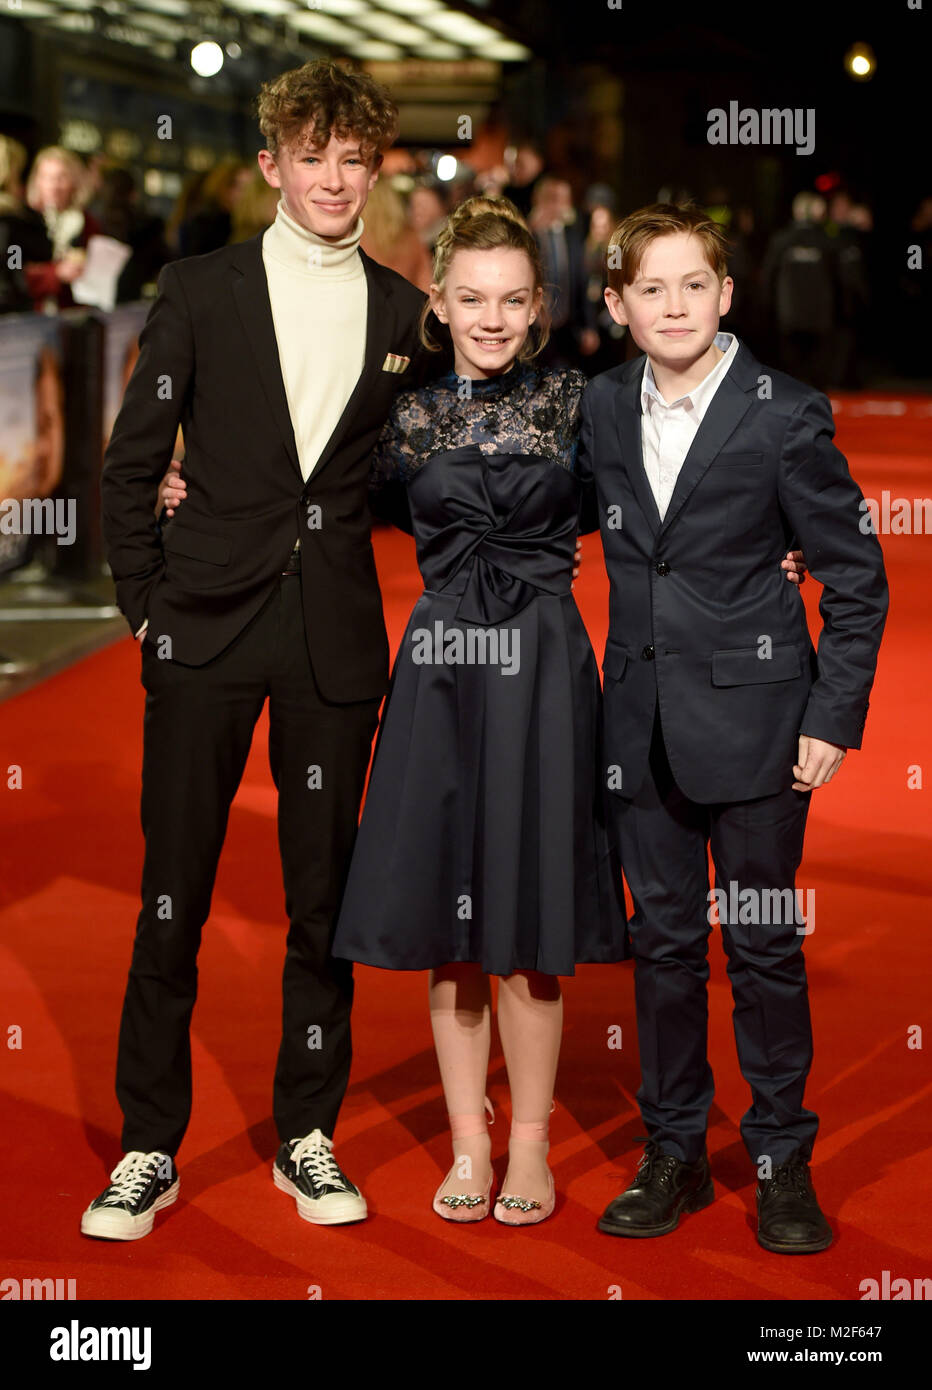 Photo Must Be Credited ©Alpha Press 079965 06/02/2018 Finn Elliot, Eleanor Stagg and Kit Connor  The World Premiere Of The Mercy Leicester Square London Stock Photo